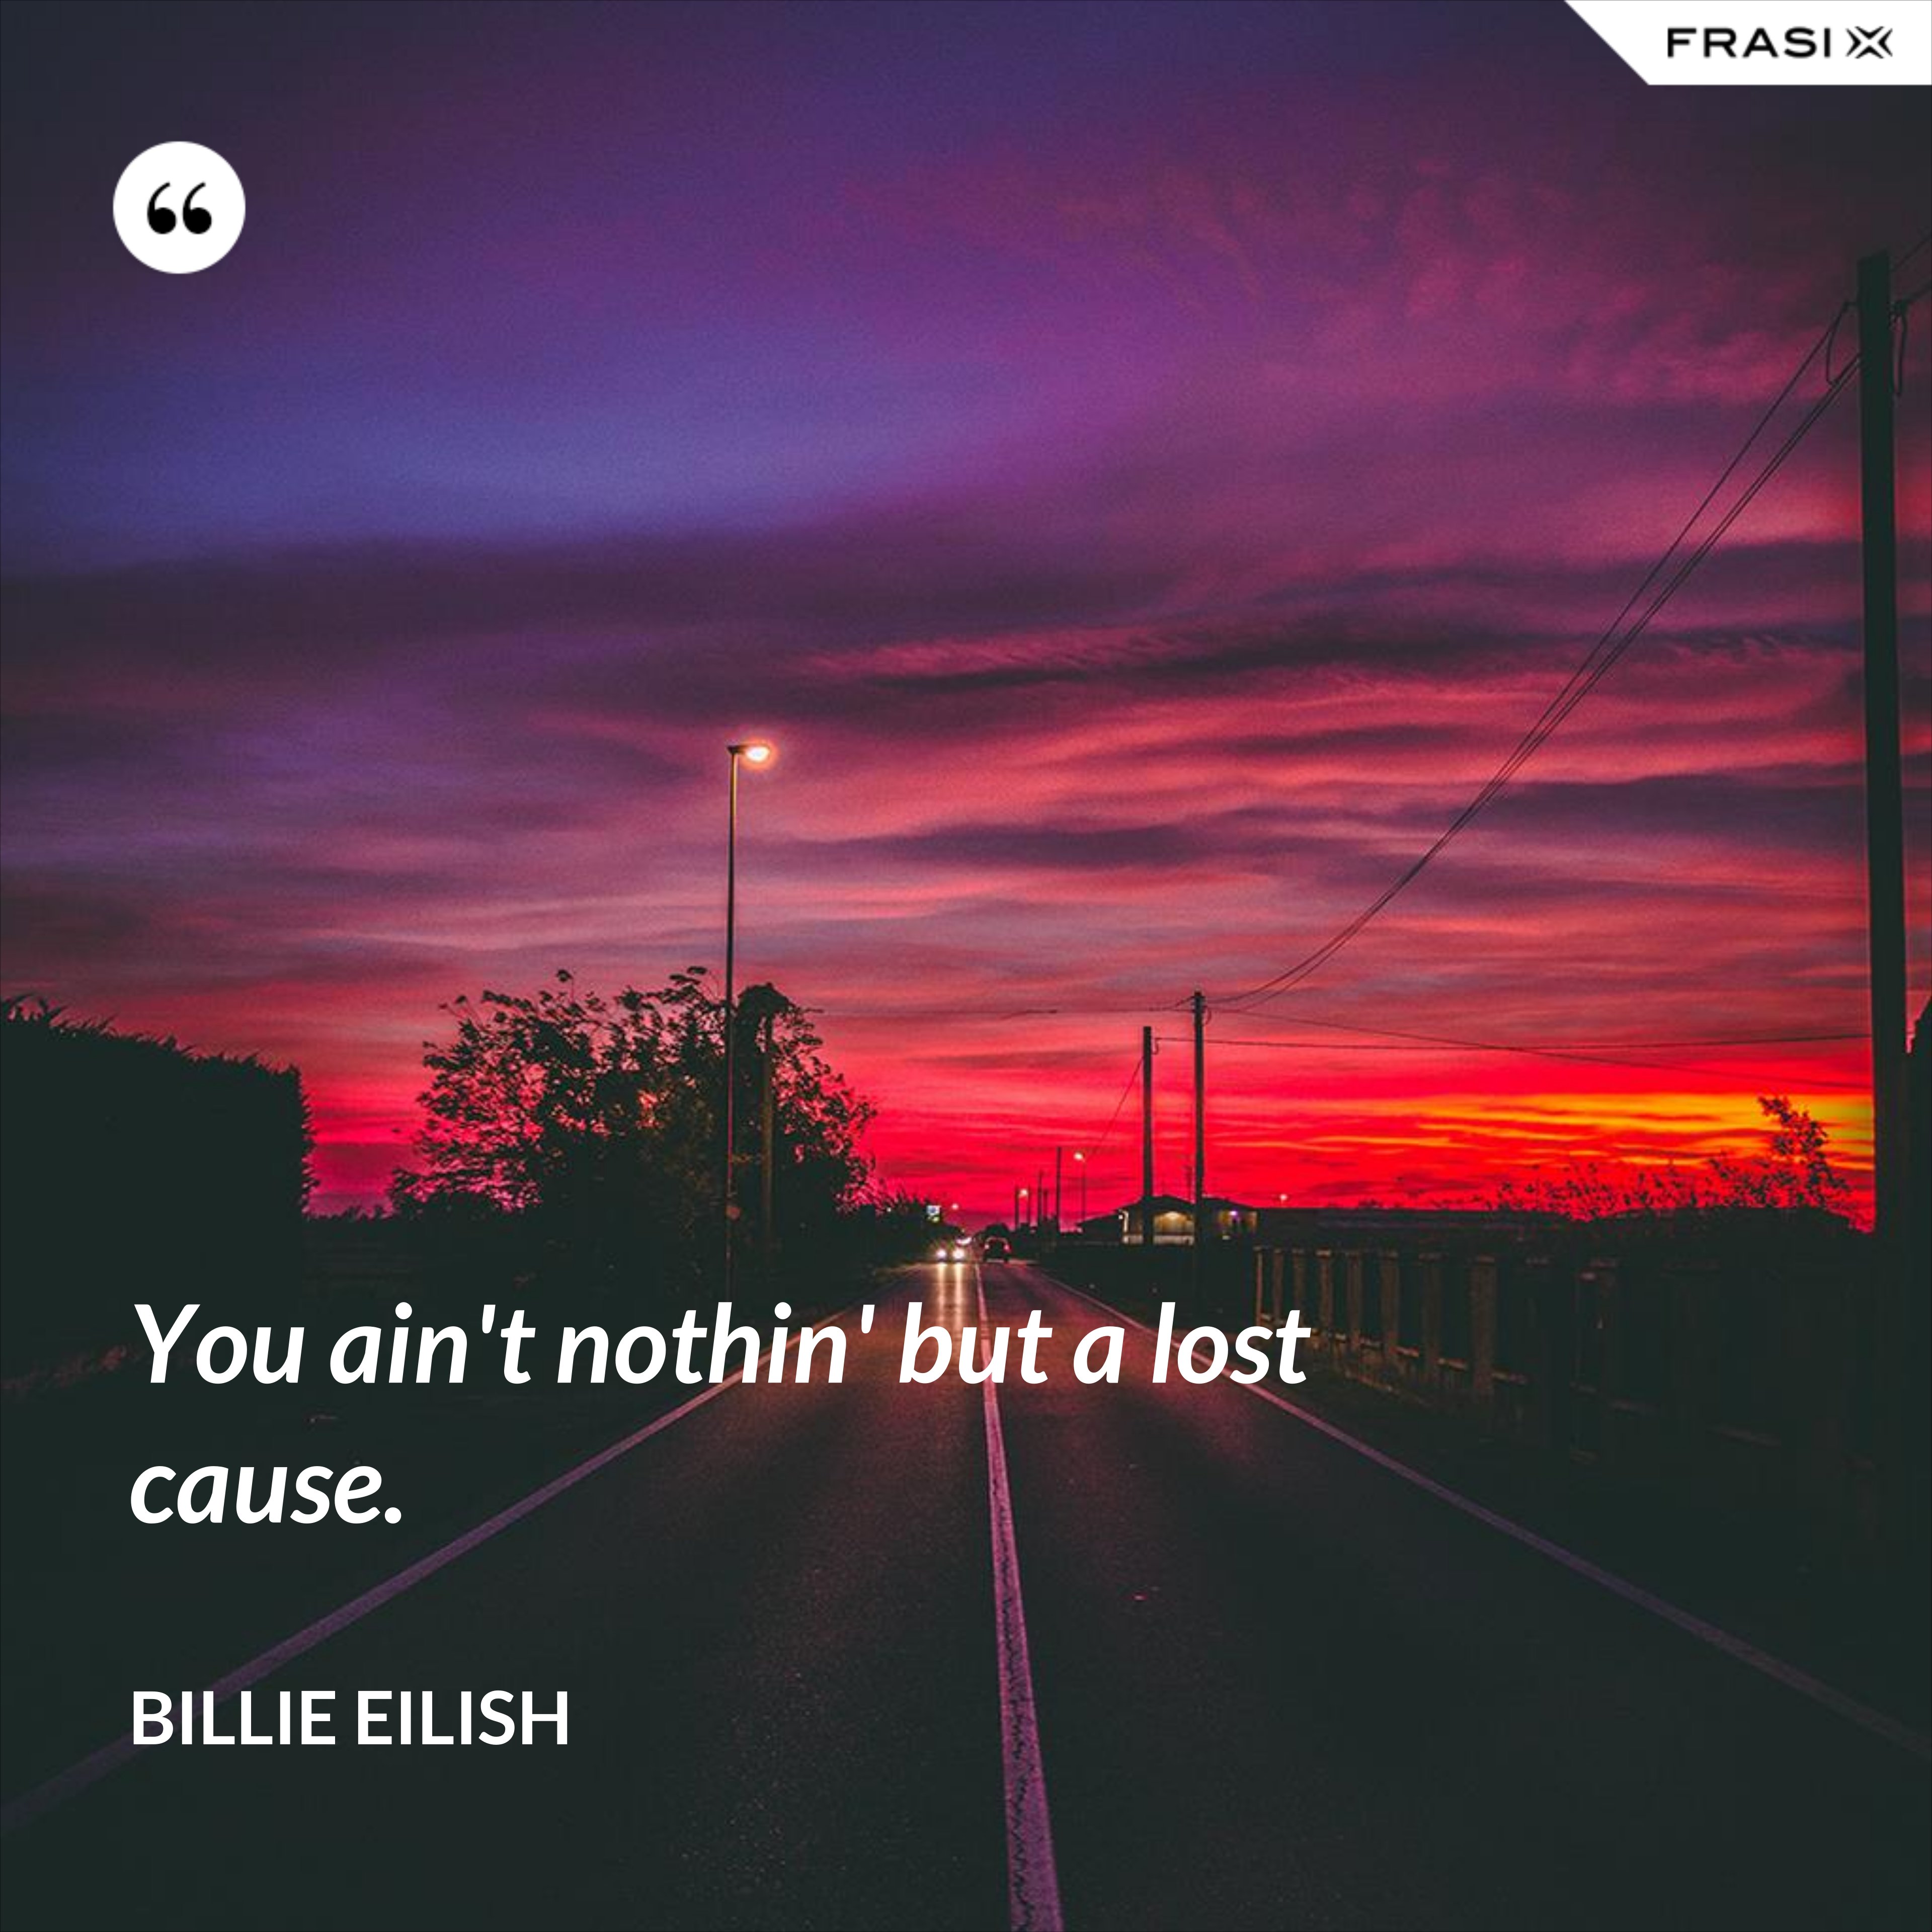 You ain't nothin' but a lost cause. - Billie Eilish